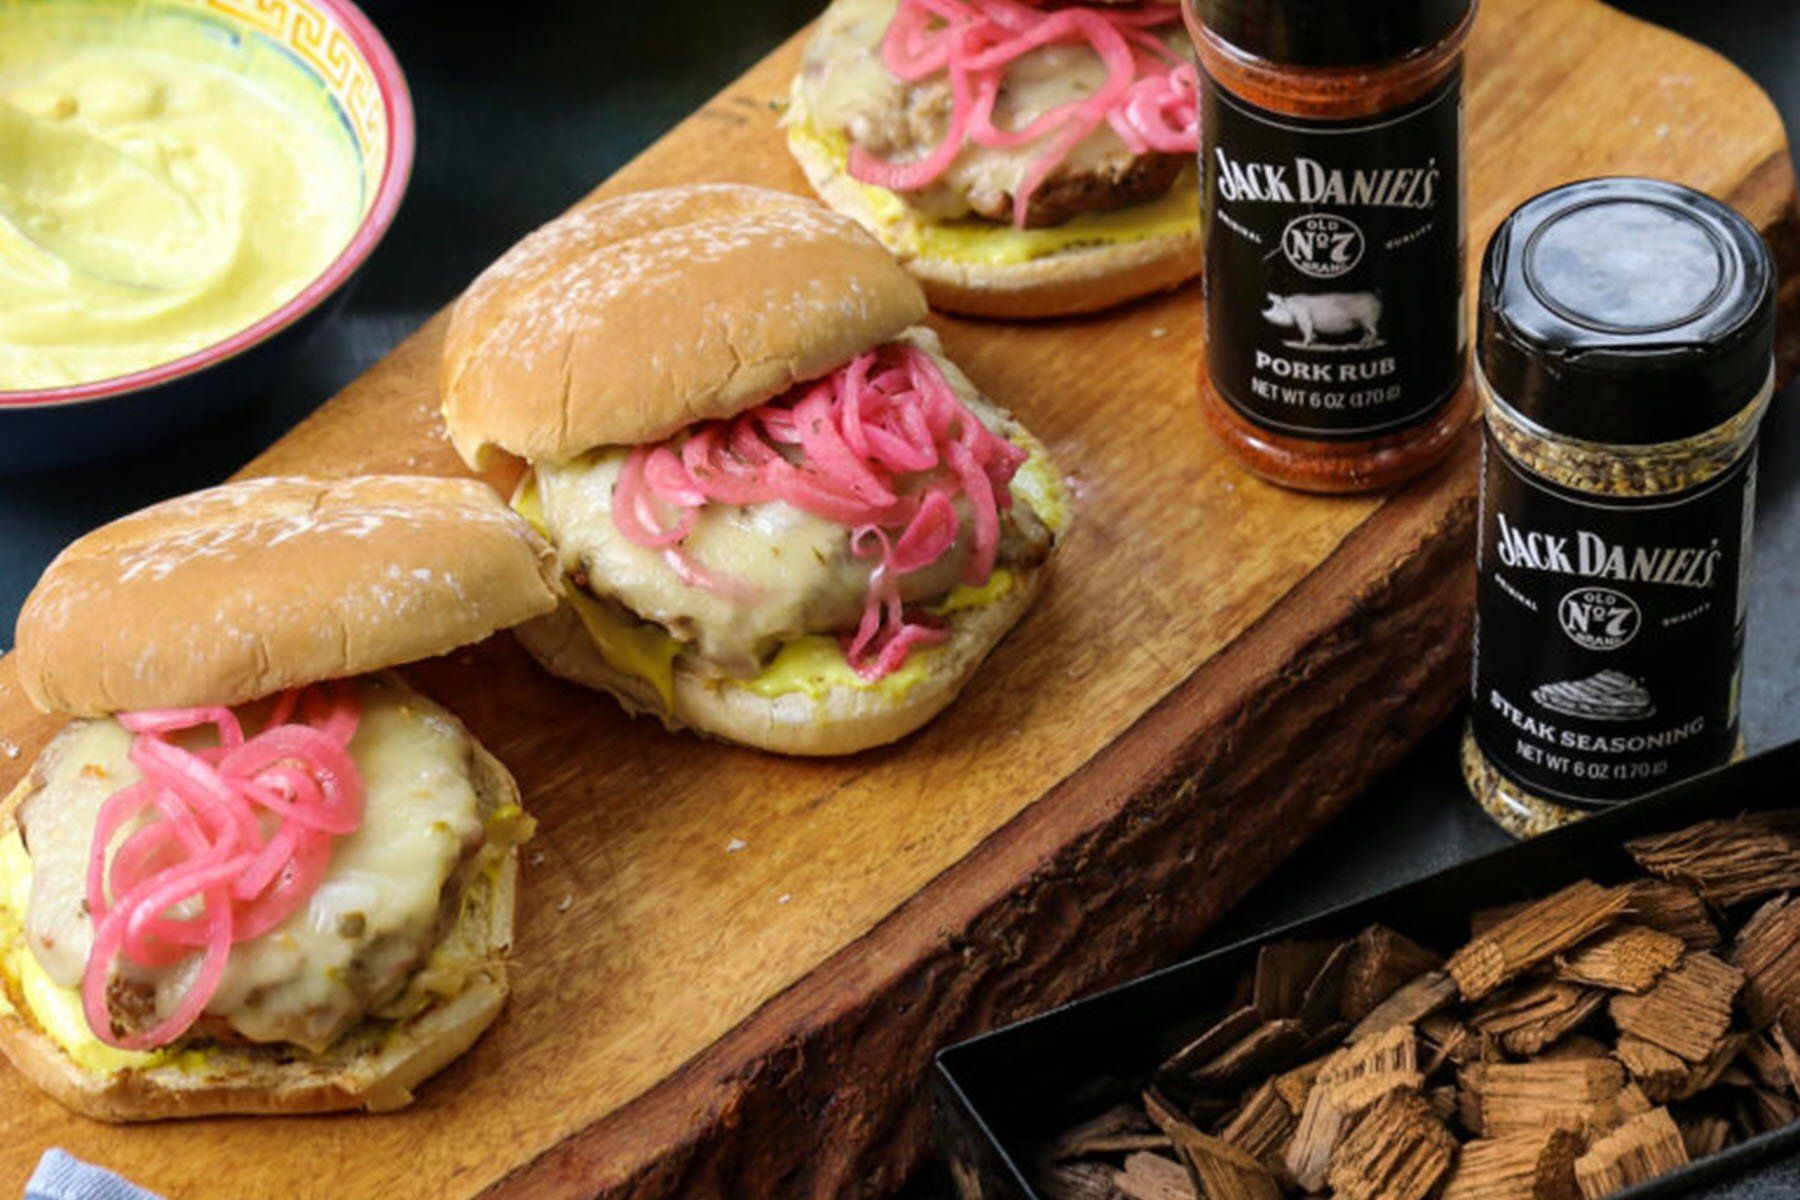 Pork Burgers with cheese and pickled onions, aoili, Jack Daniels Steak Seasoning and Pork rub, and Jack Daniel's whiskey barrel smoking chips in a smoker box